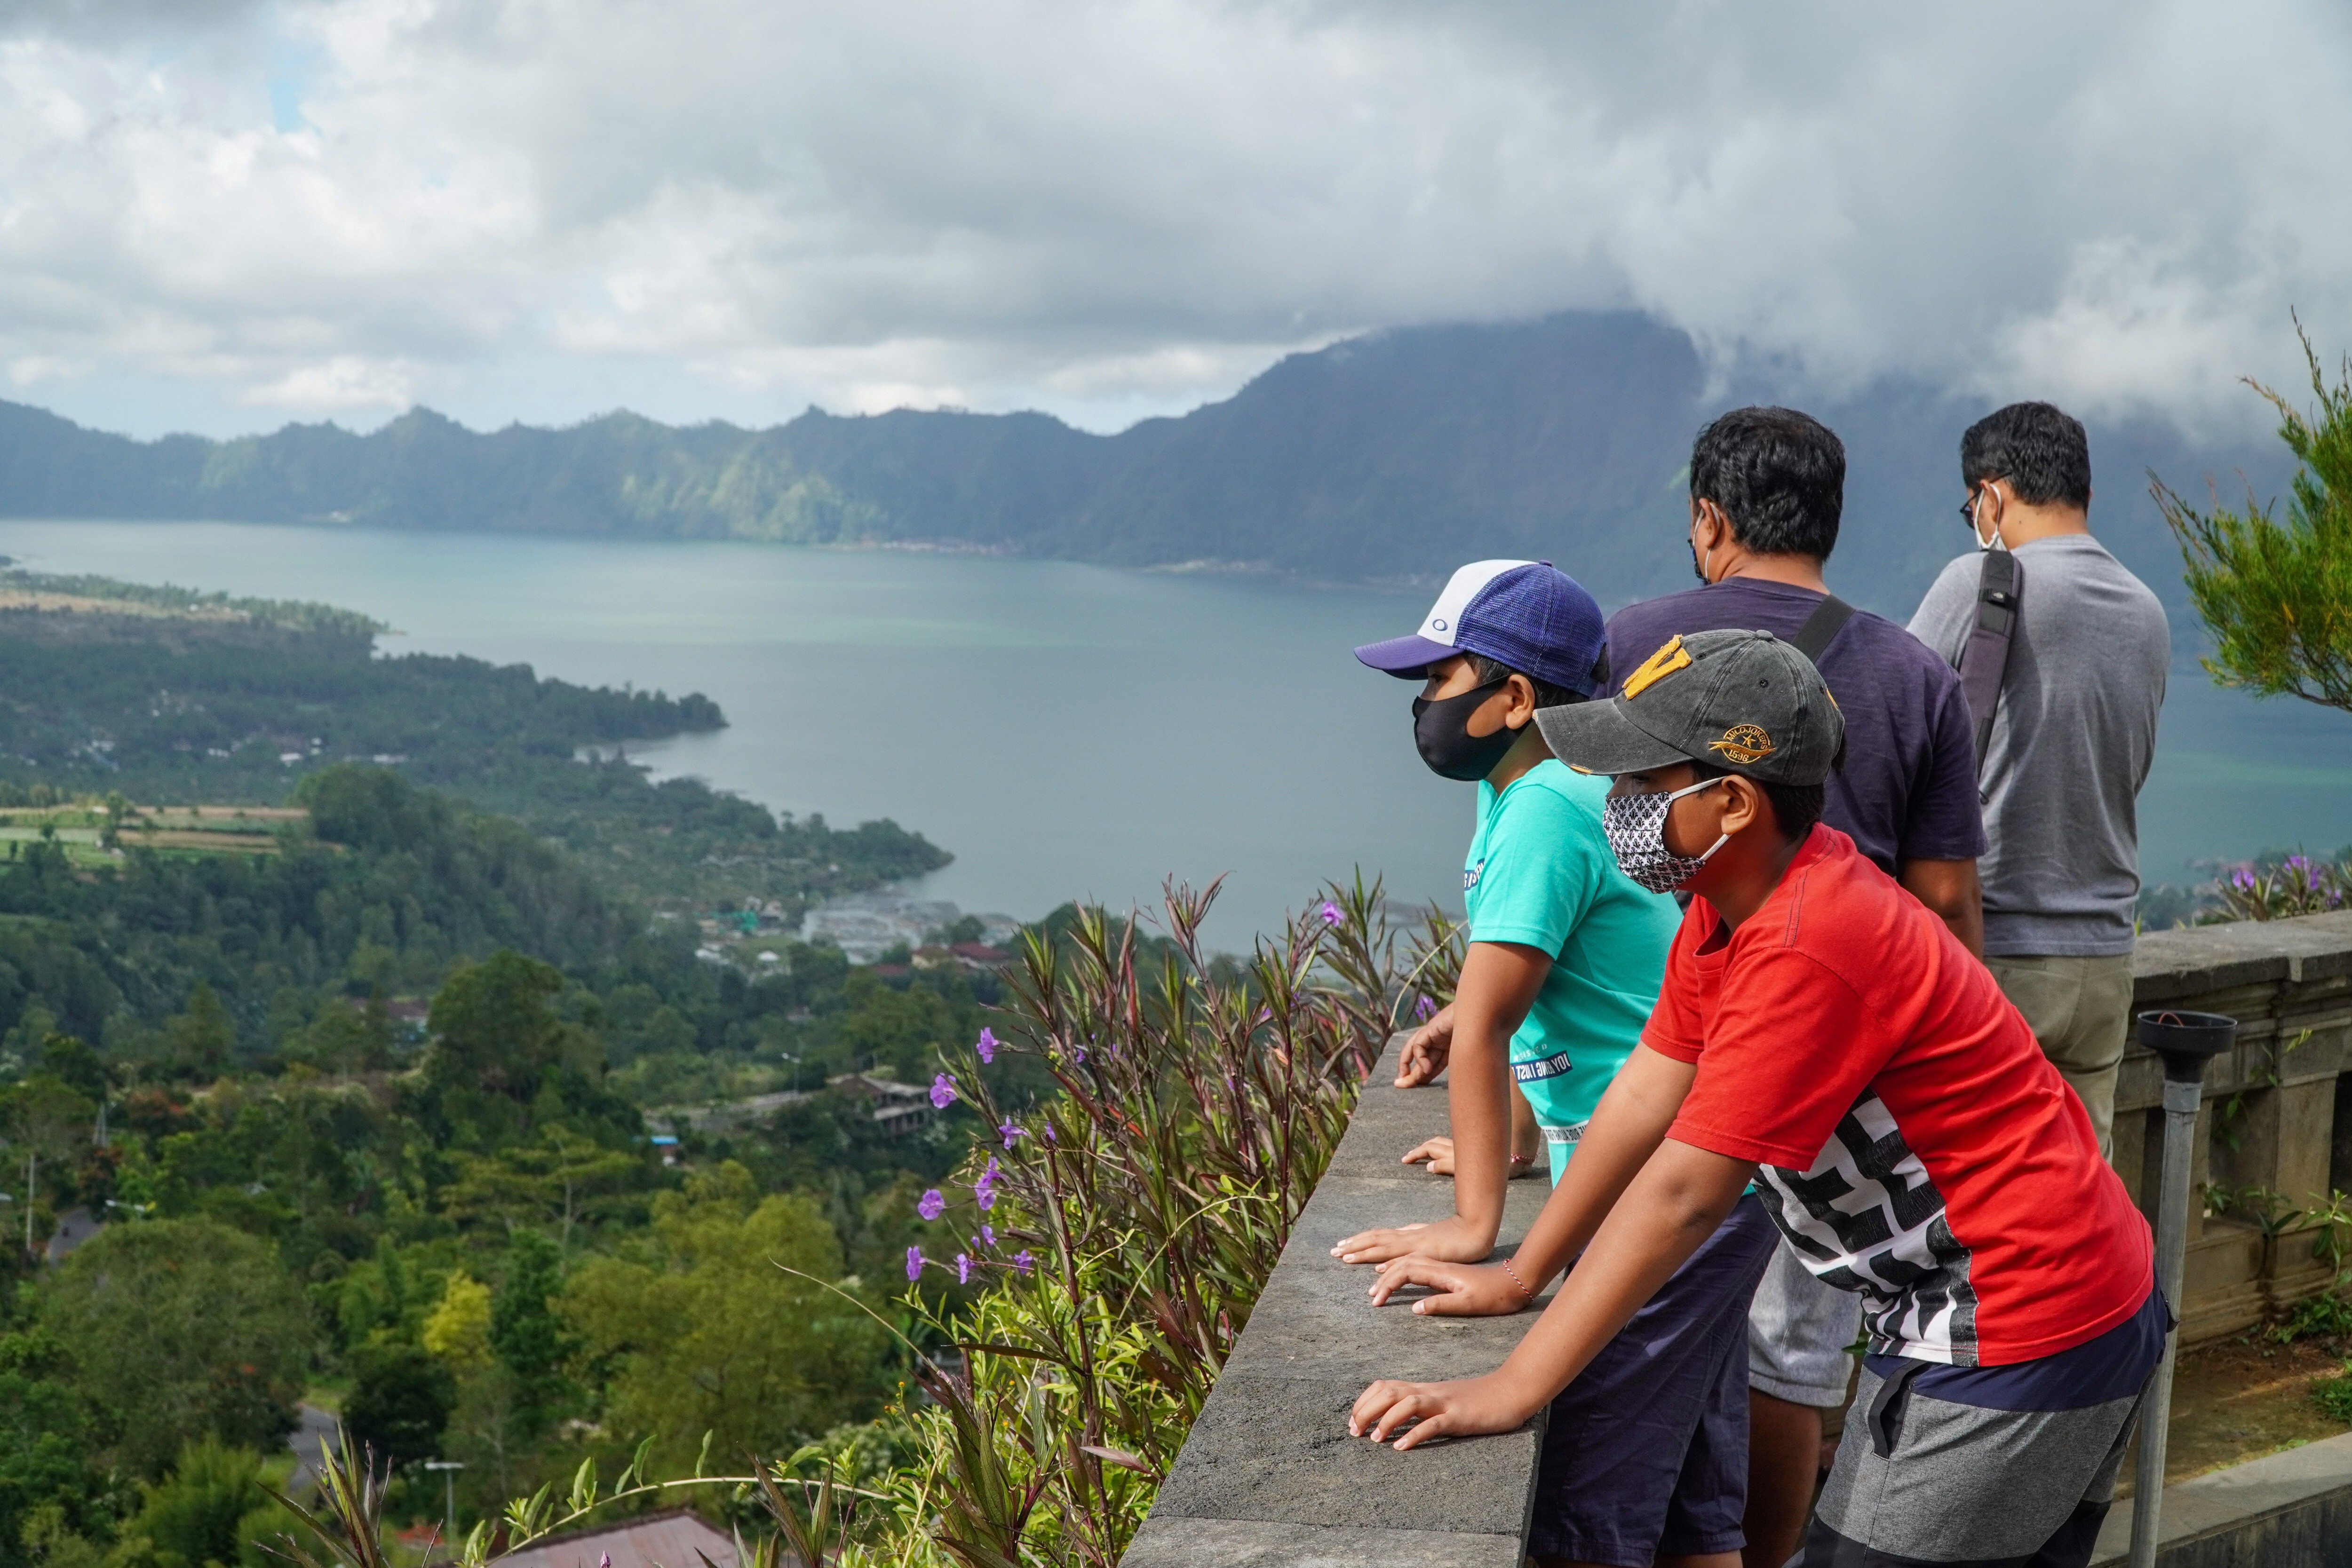 Visitors wearing face masks admire the scenery at Lake Batur in Indonesia. Indonesia’s tourism industry is looking at ways of luring visitors back to the country. Photo: SOPA Images/LightRocket via Getty Images